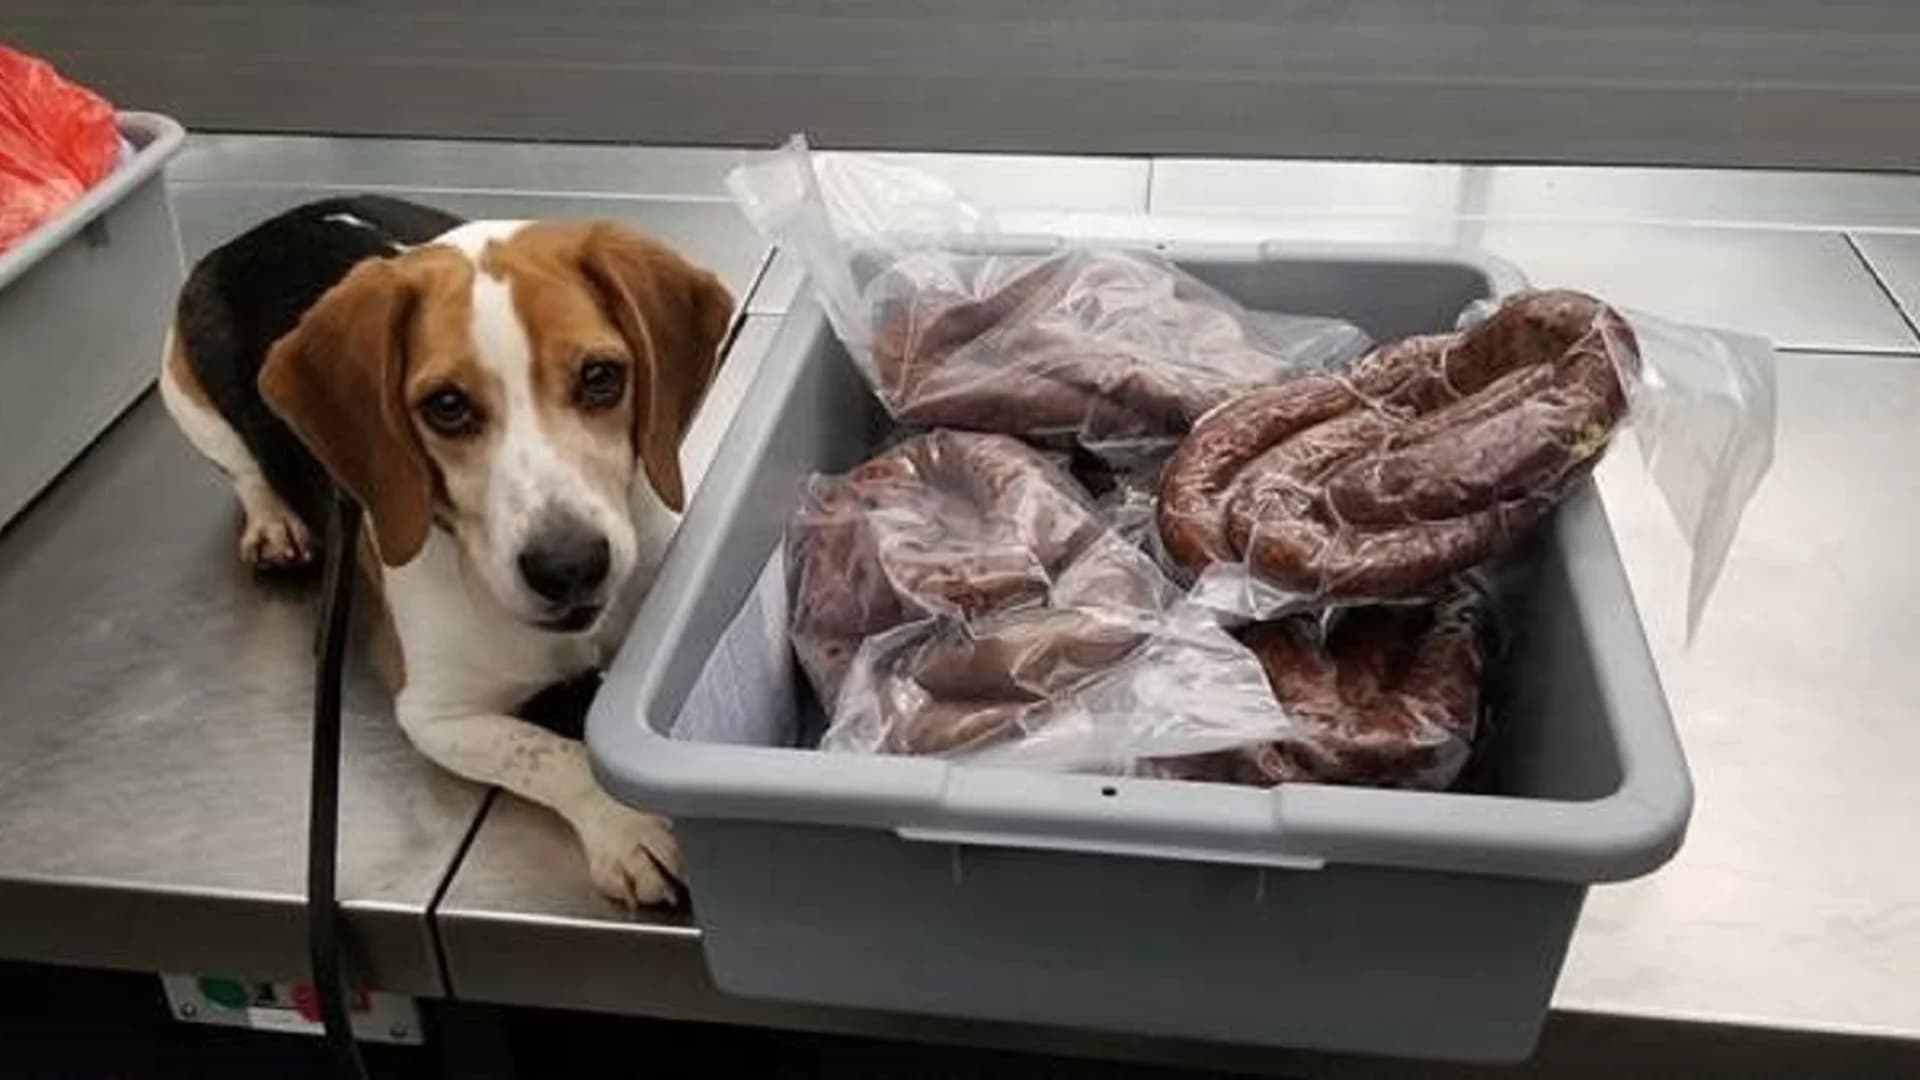 Officials: 88 pounds of ‘swine meat’ sausages confiscated at Newark Liberty Int’l Airport